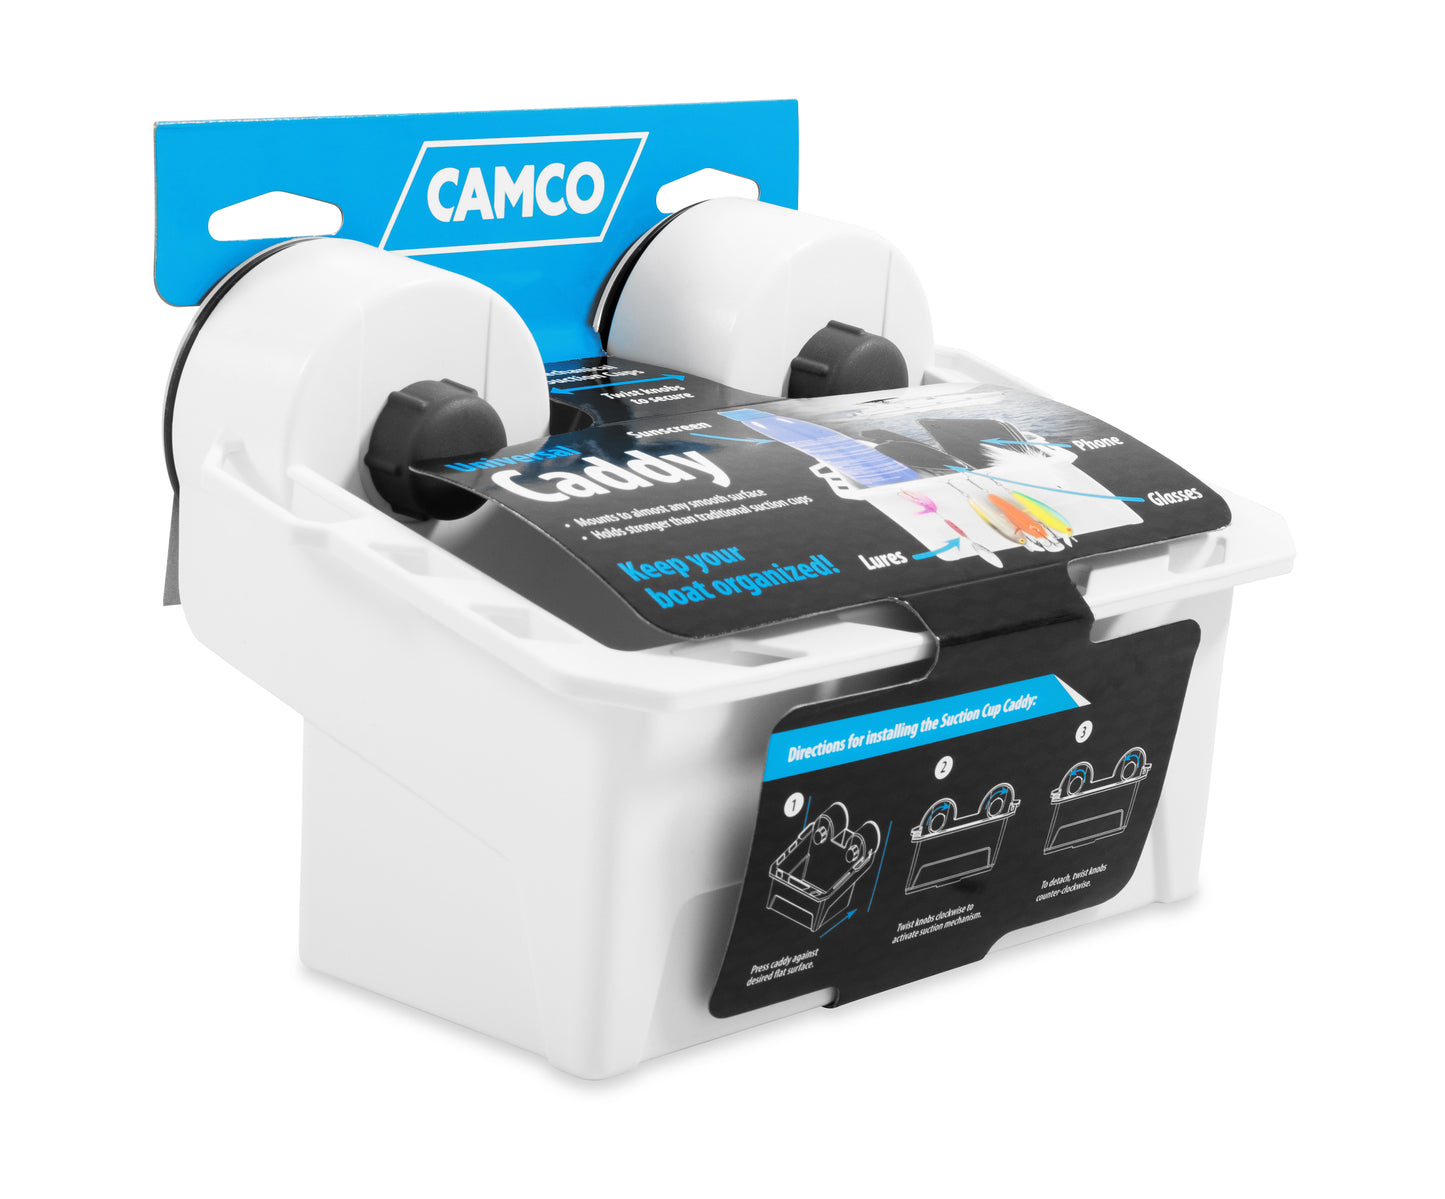 Camco Universal Mechanical Suction Cup Caddy - White